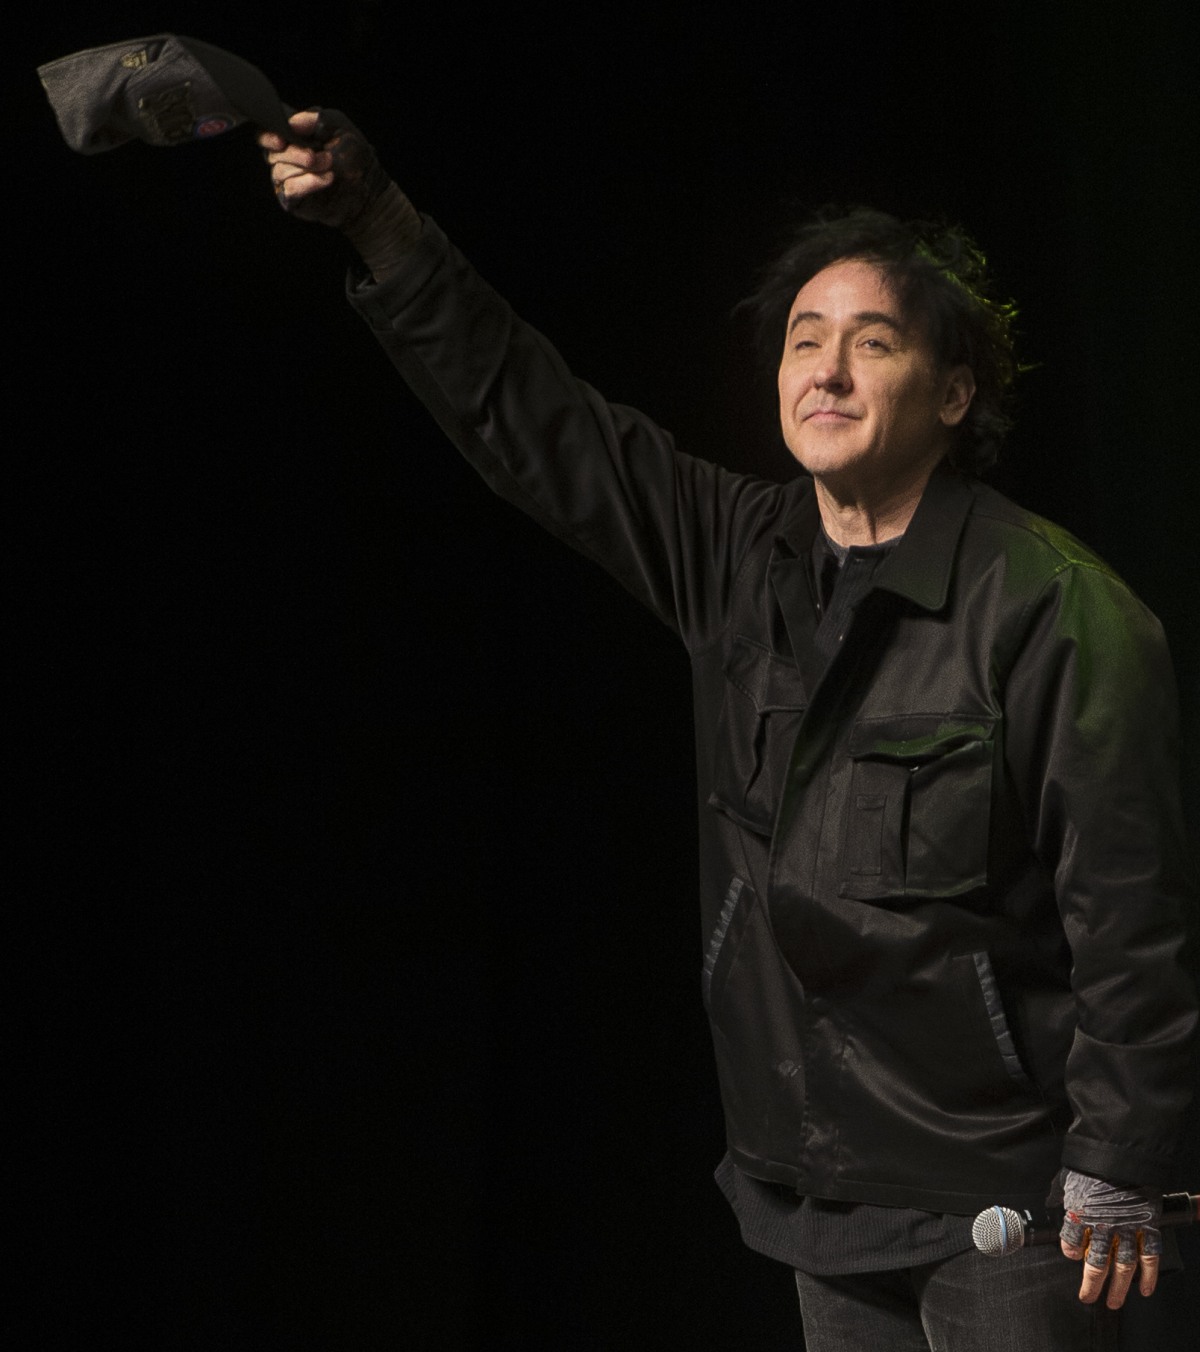 John Cusack attends the Calgary Comic and Entertainment Expo